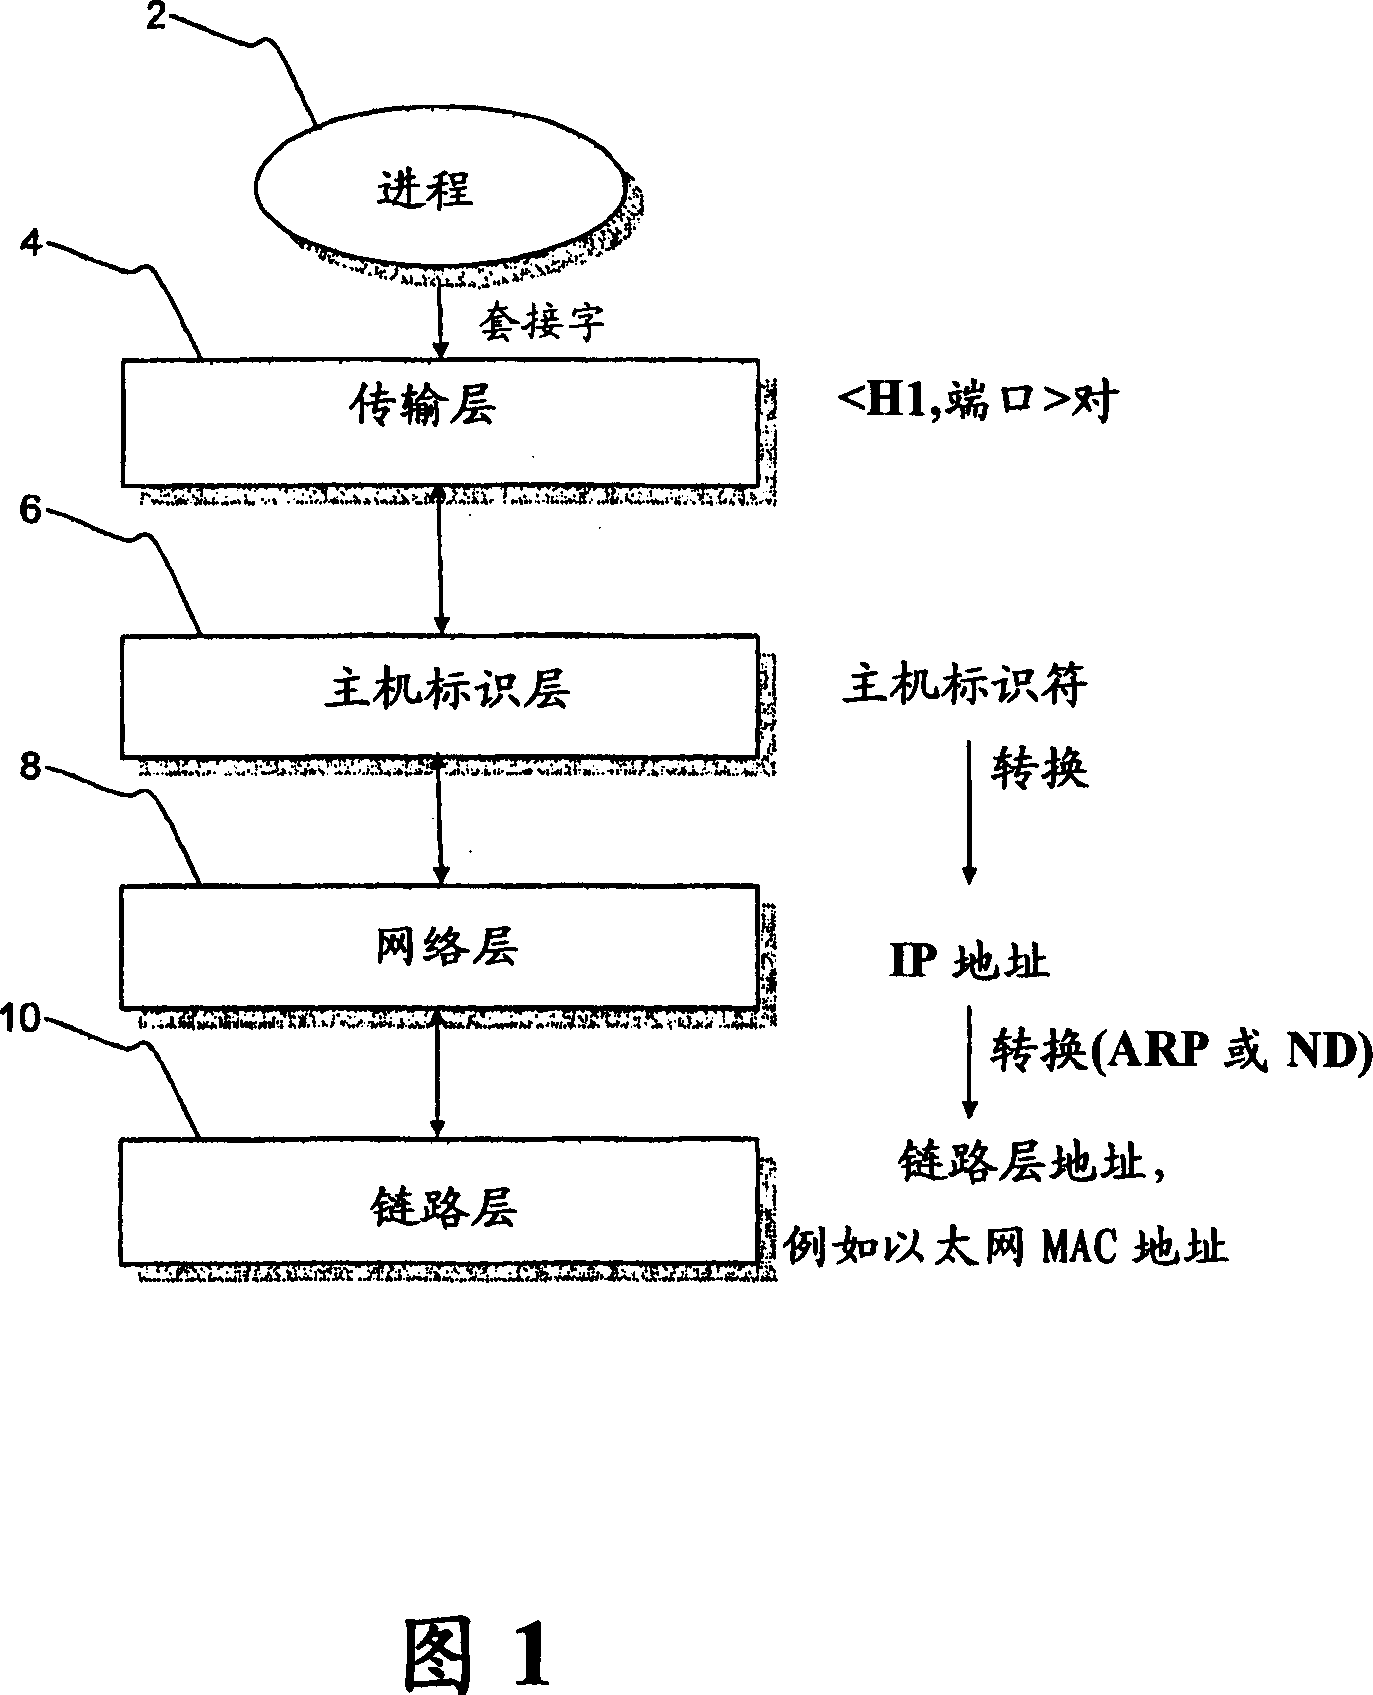 Identification method and apparatus for establishing host identity protocol (hip) connections between legacy and hip nodes